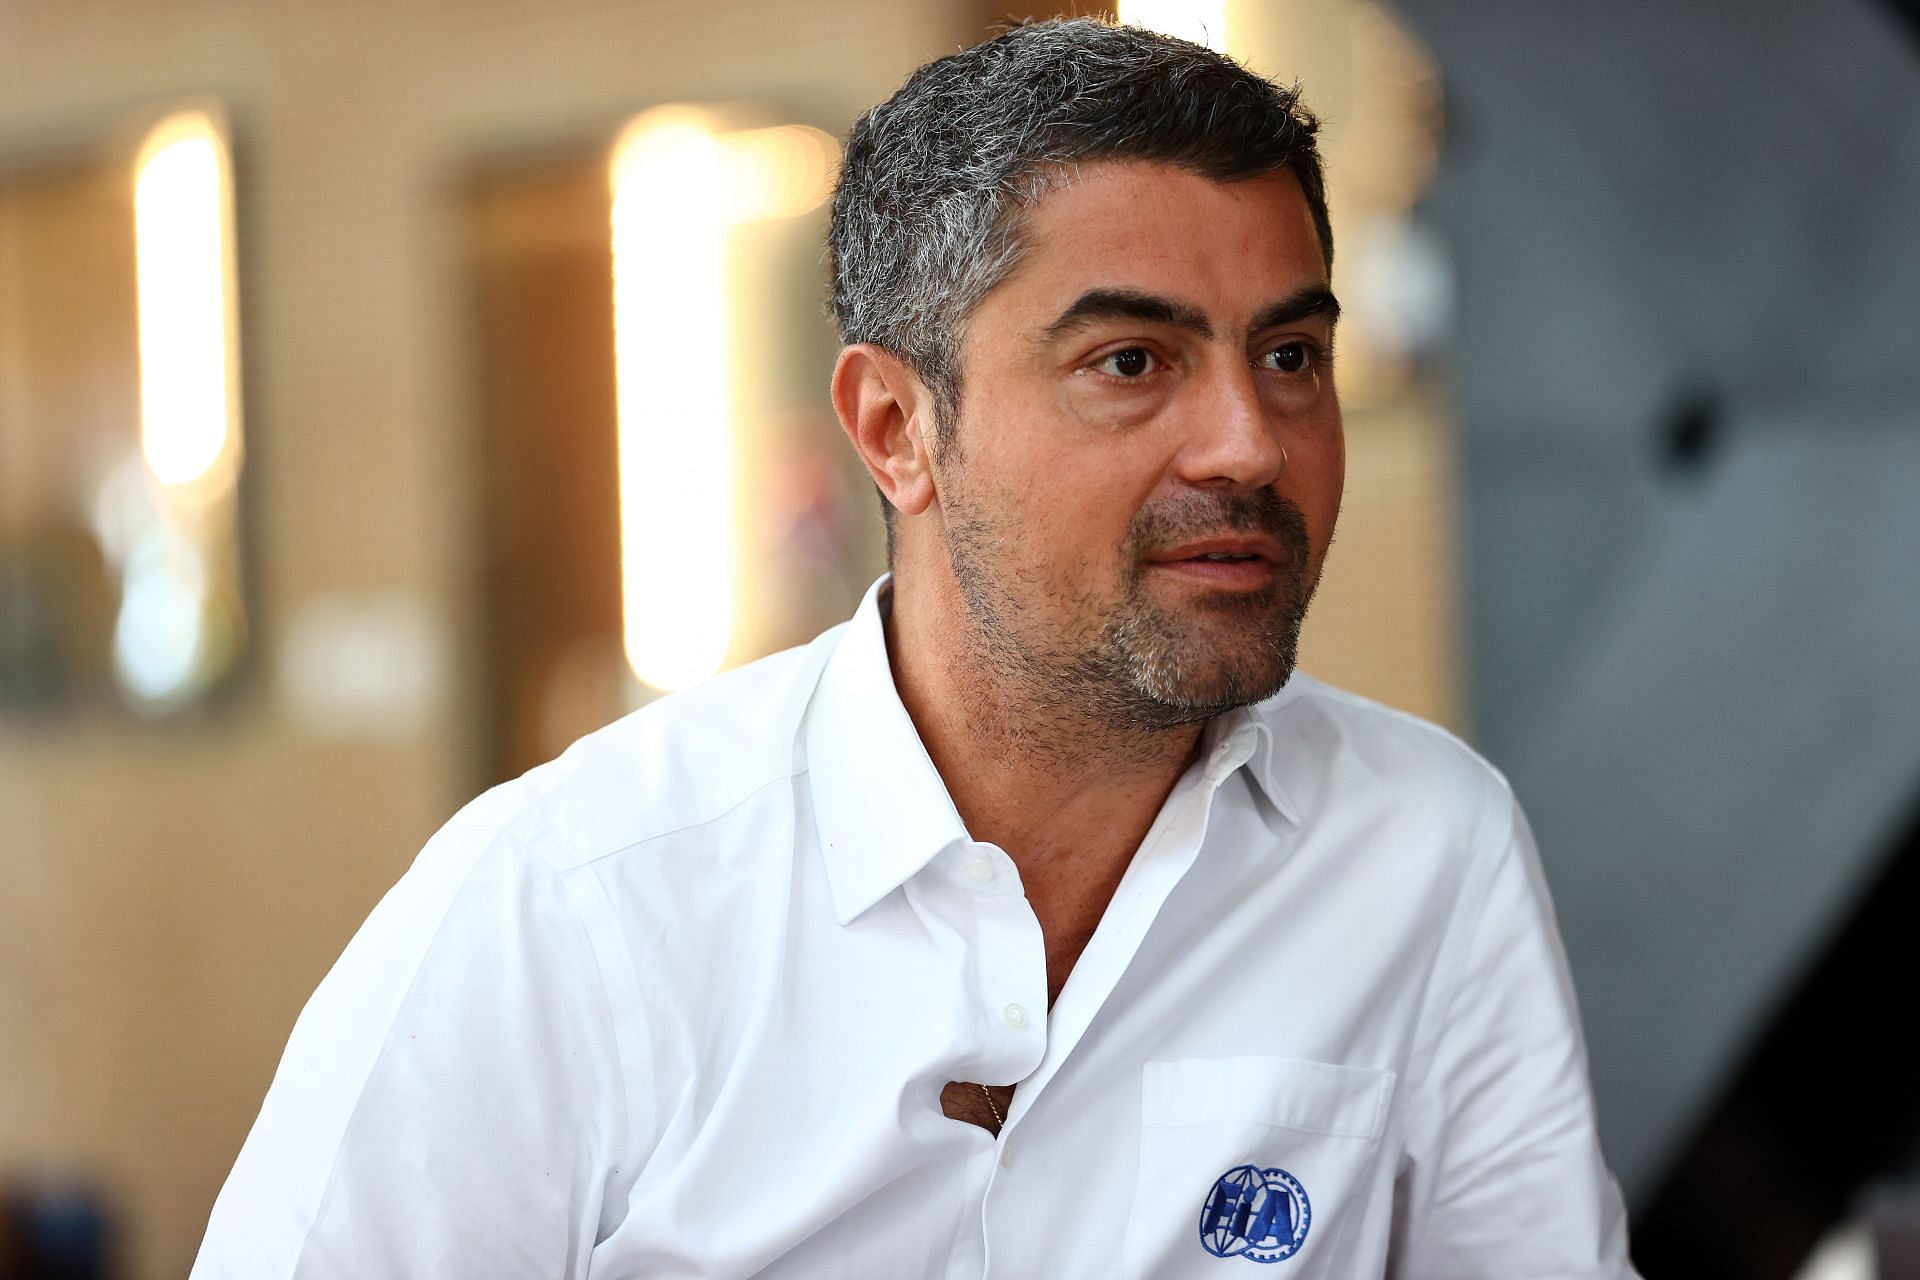 FIA Formula 1 Race Director Michael Masi during previews ahead of the 2021 Abu Dhabi GP (Photo by Bryn Lennon/Getty Images)